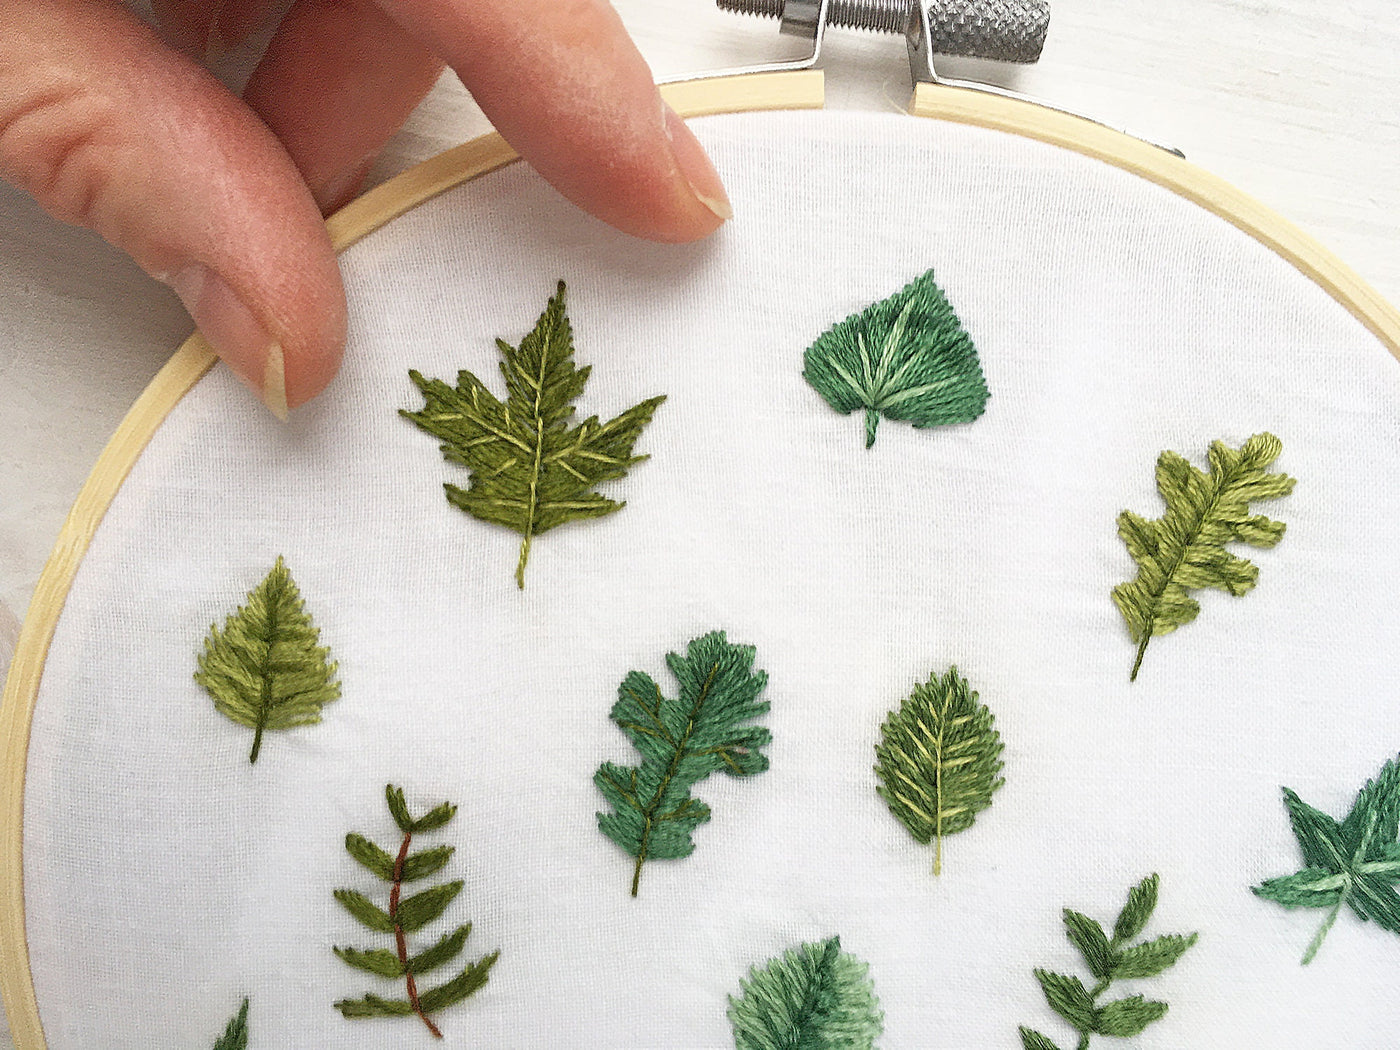 Tiny Leaves Hand Embroidery pattern download, leaf and tree design